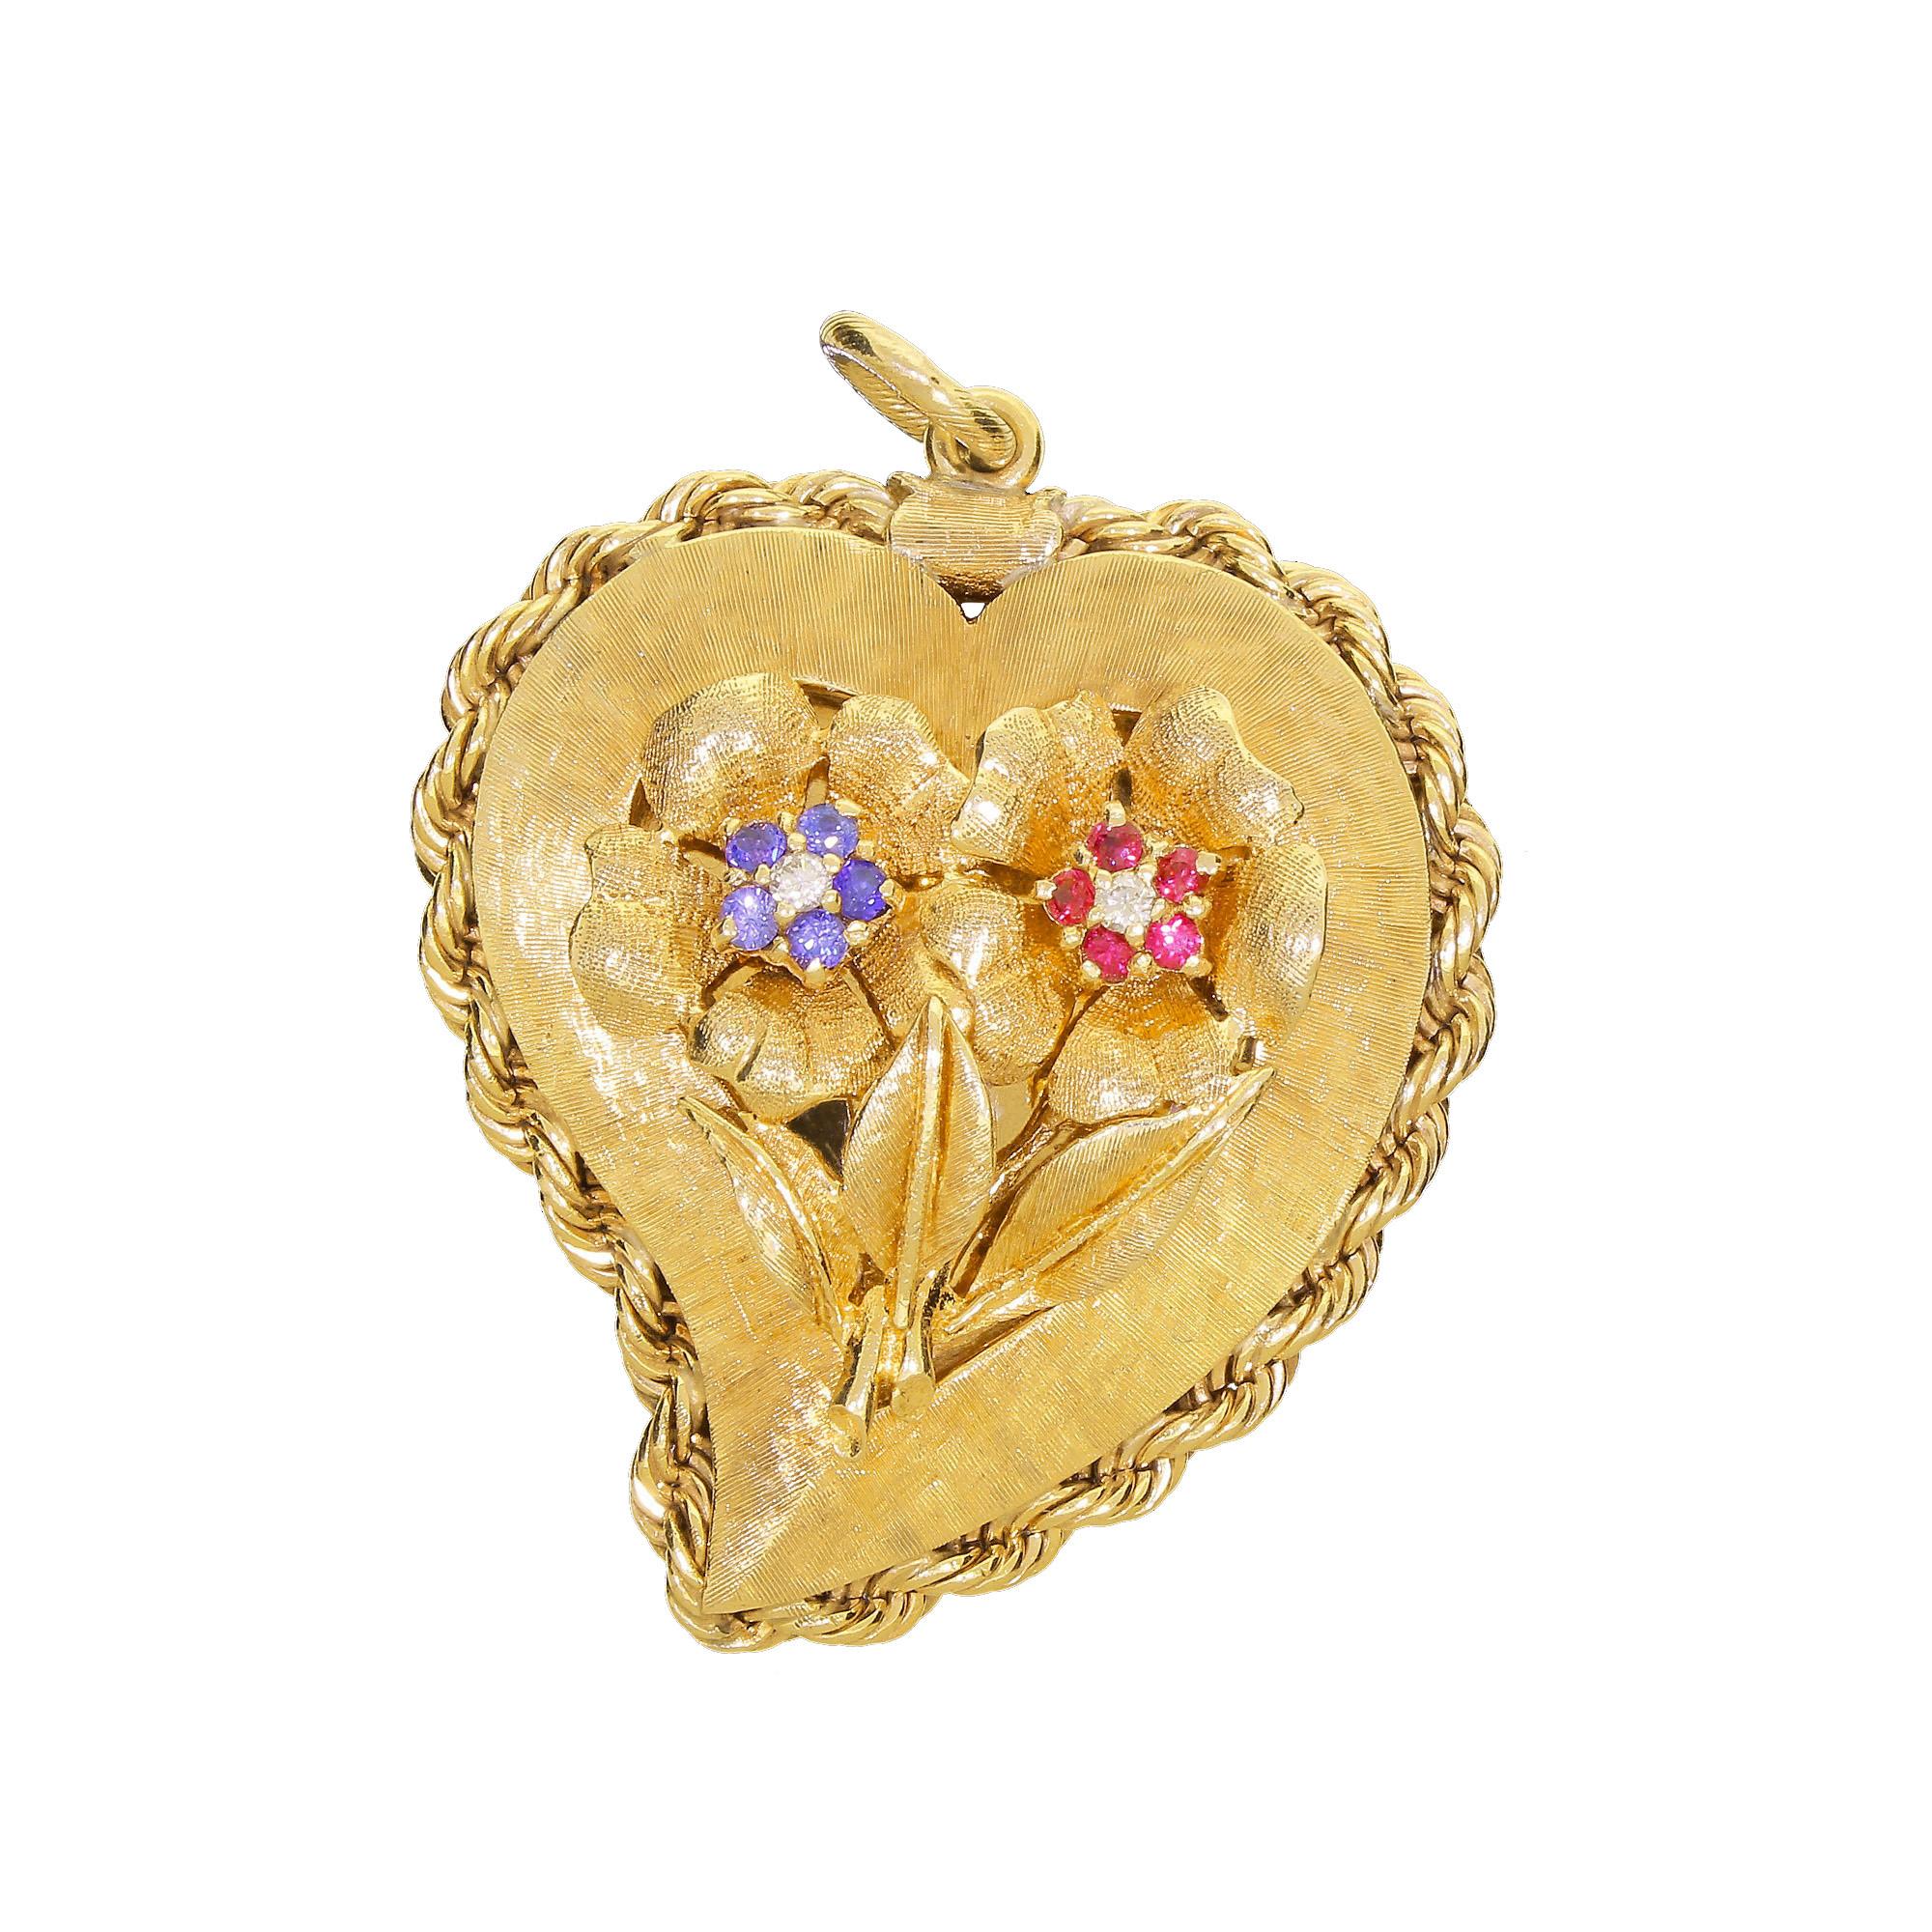 Extremely rare La Triomphe 14K yellow gold love heart photo locket pendant. This particularly large piece features an elevated lip on the right petal. When pushed, the lip swings open to reveal a secret recessed photograph compartment. This piece is